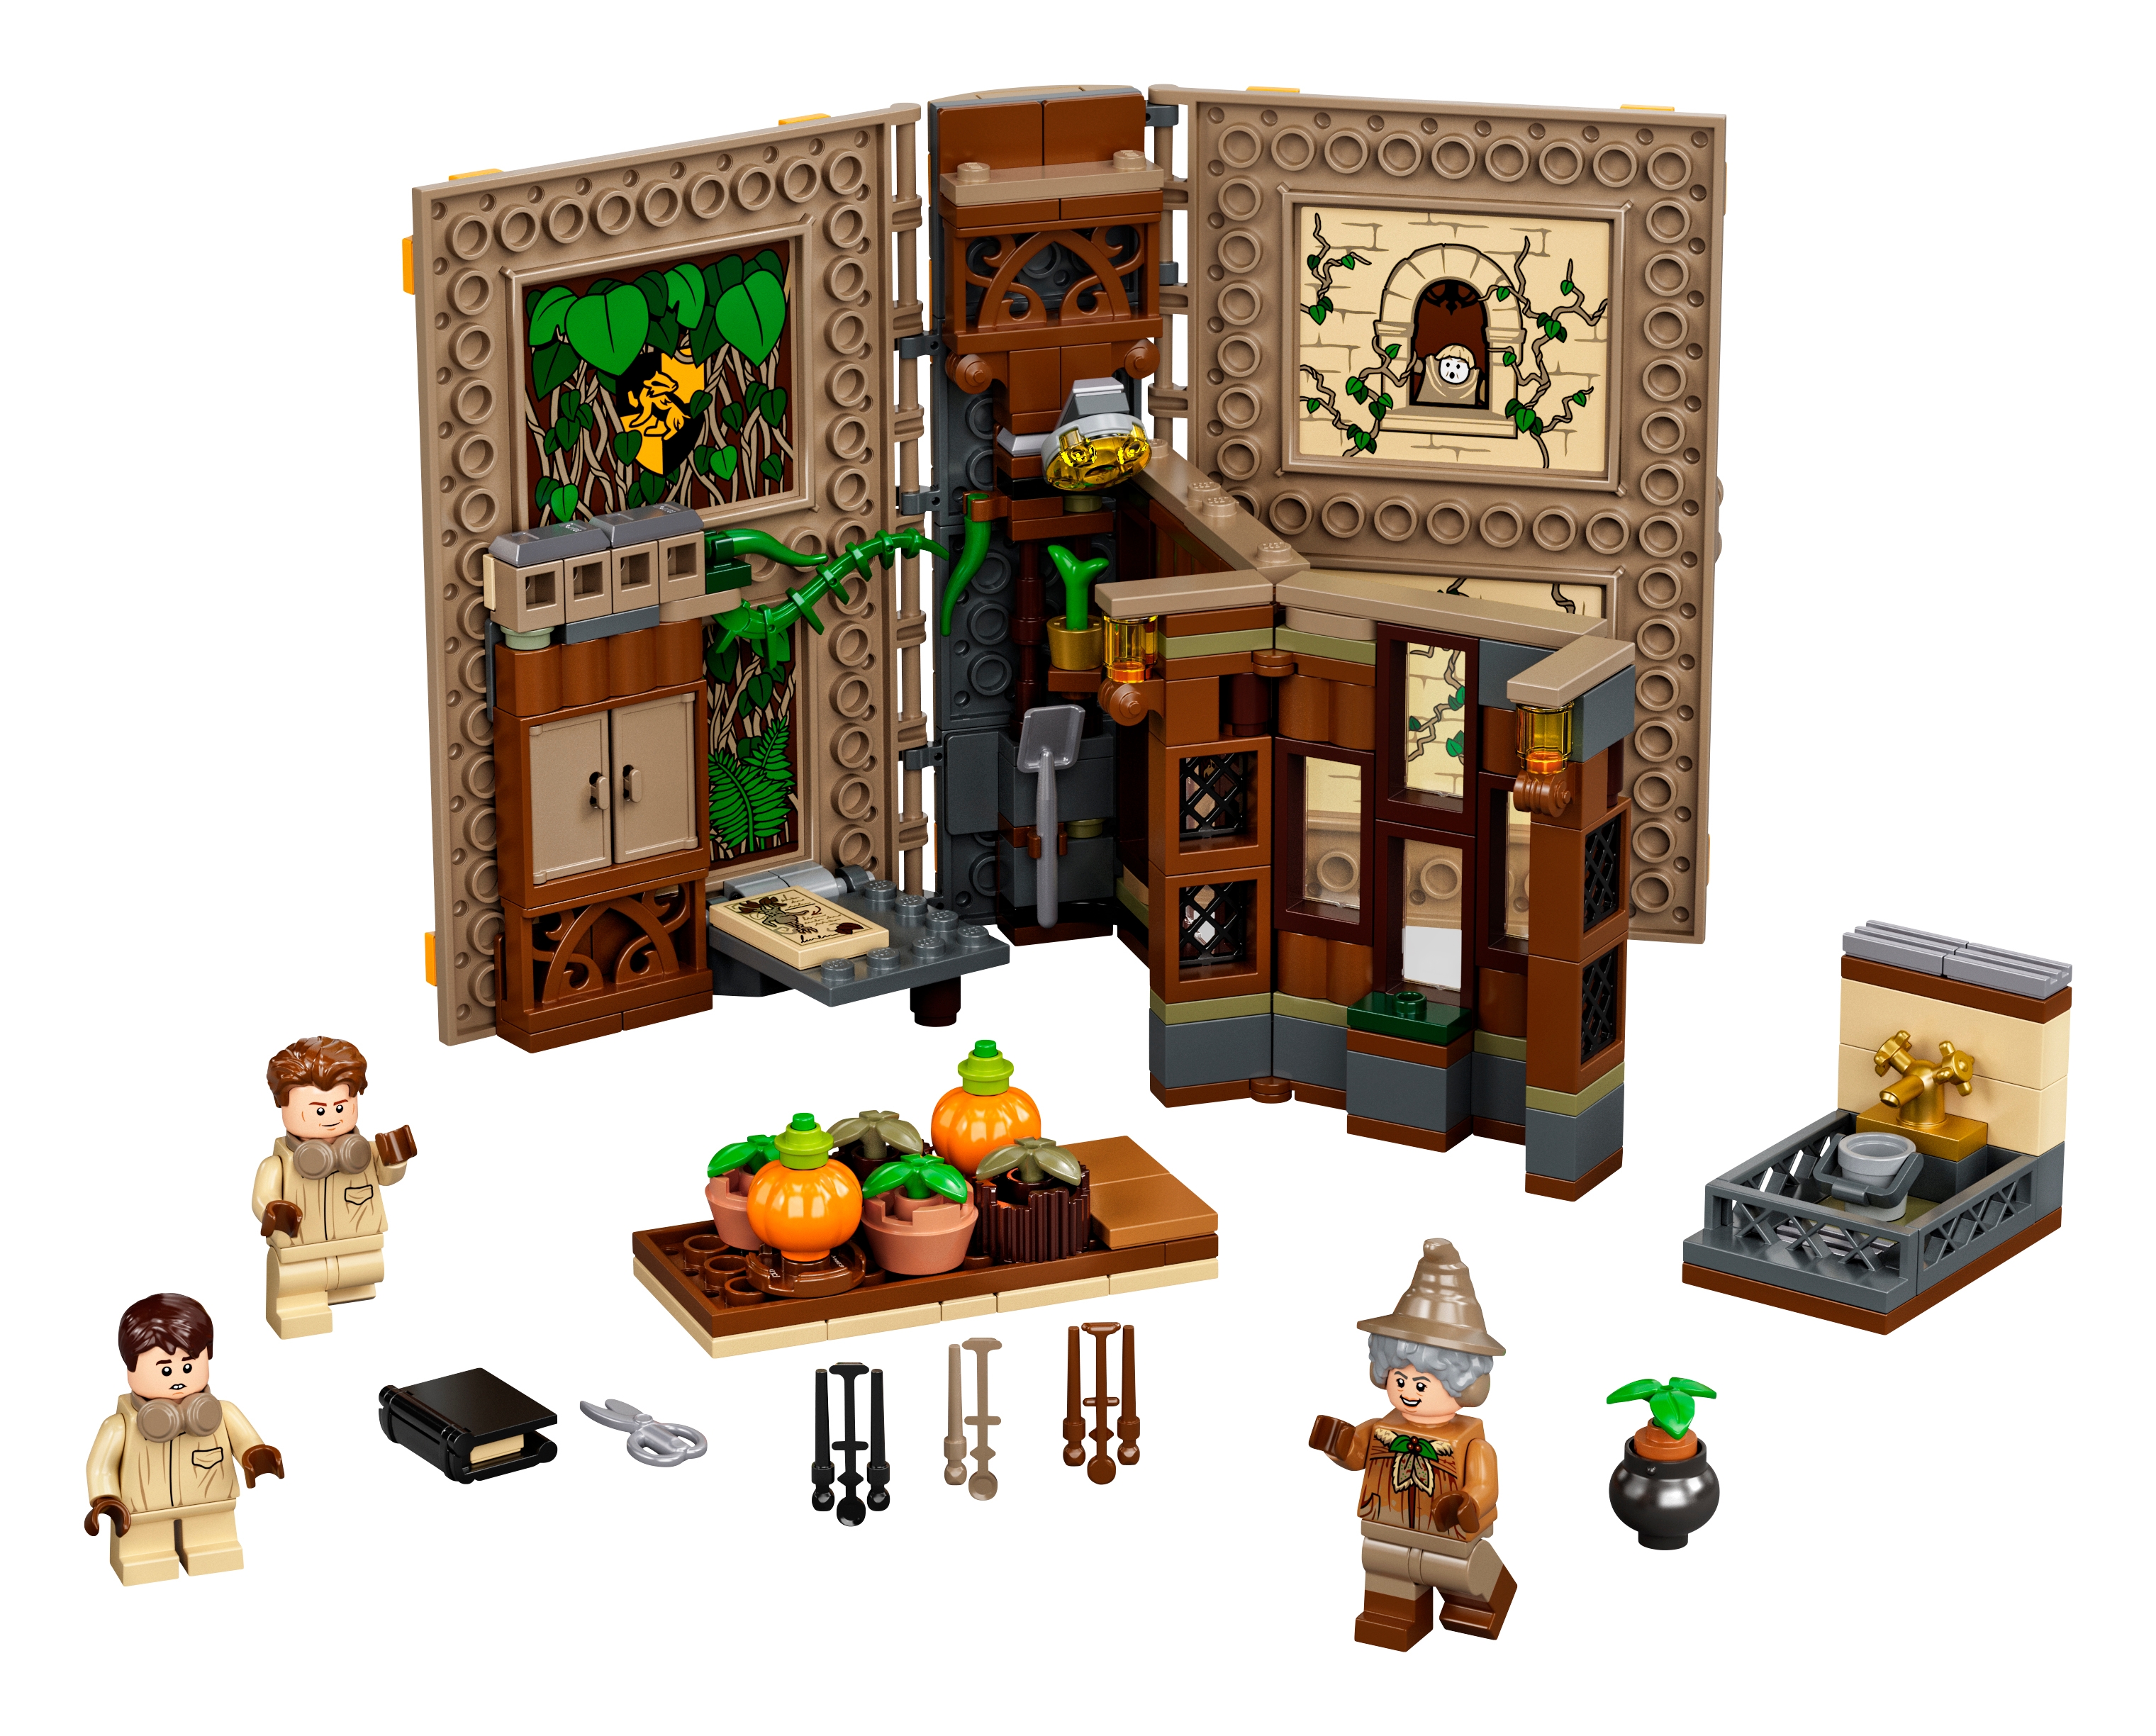 Hogwarts™ Moment: Herbology Class 76384 | Harry Potter™ | Buy online at the  Official LEGO® Shop US